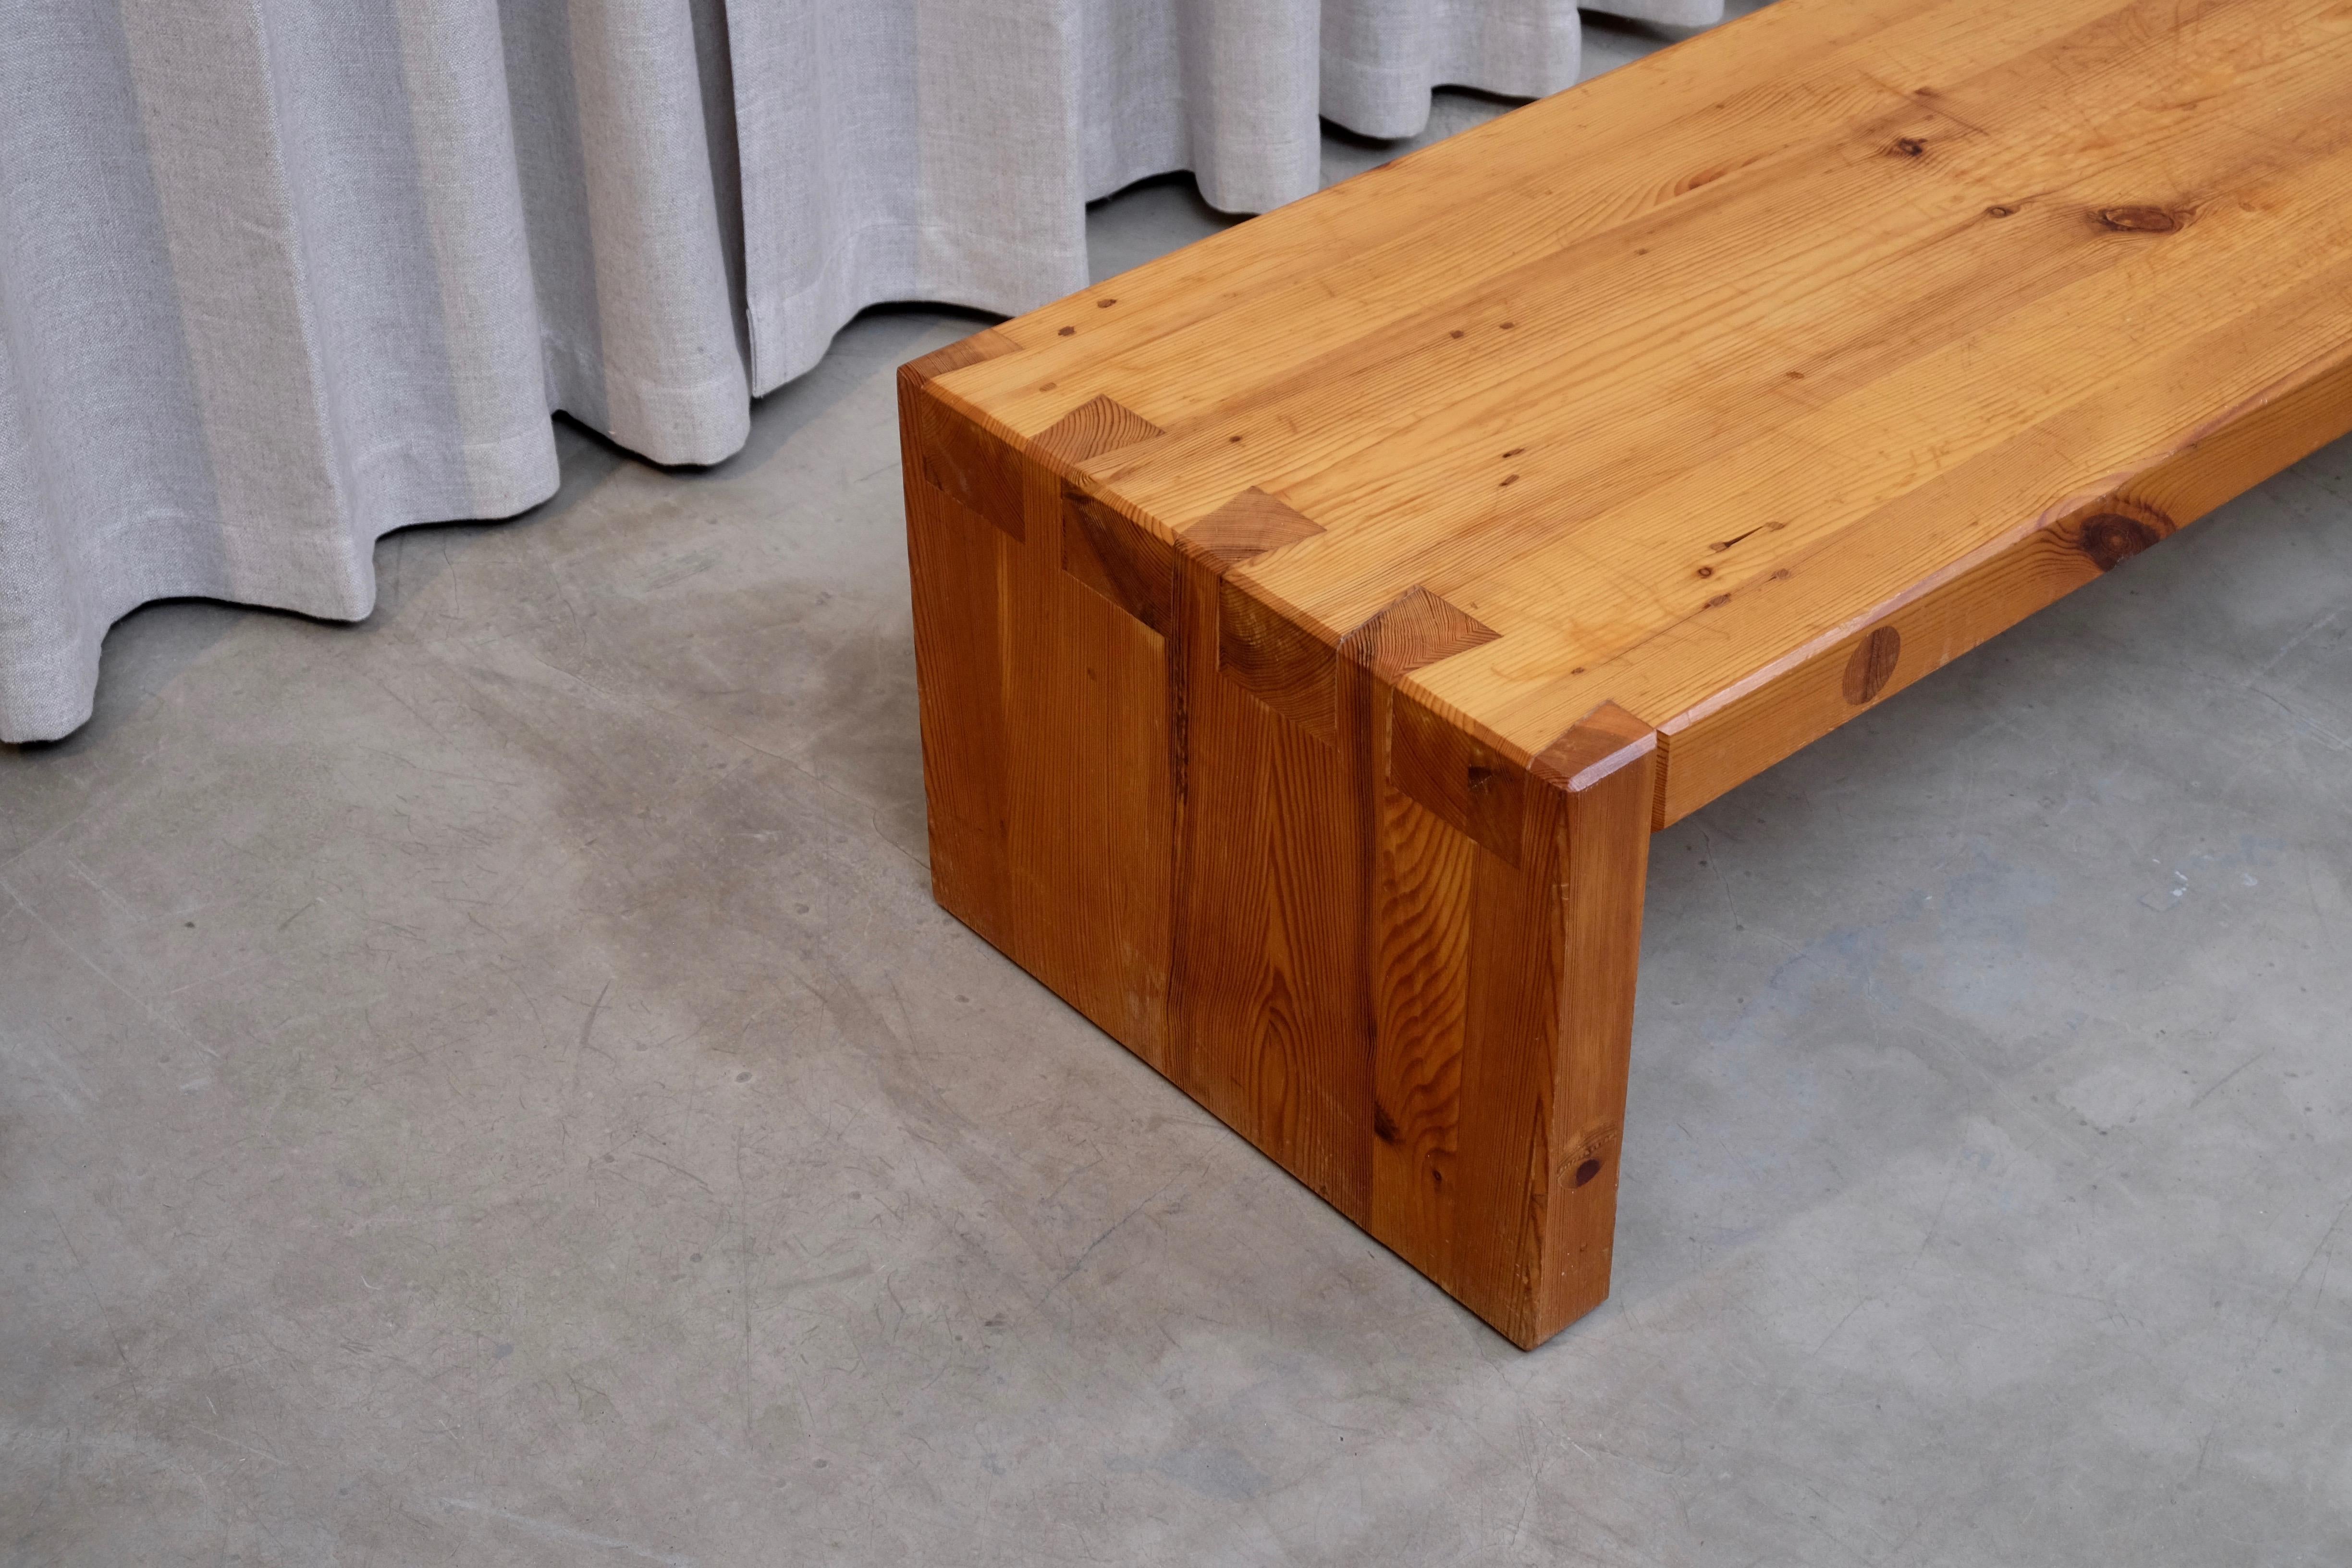 Scandinavian Modern Roland Wilhelmsson Table / Bench in Pine, Produced in Sweden, 1960s For Sale